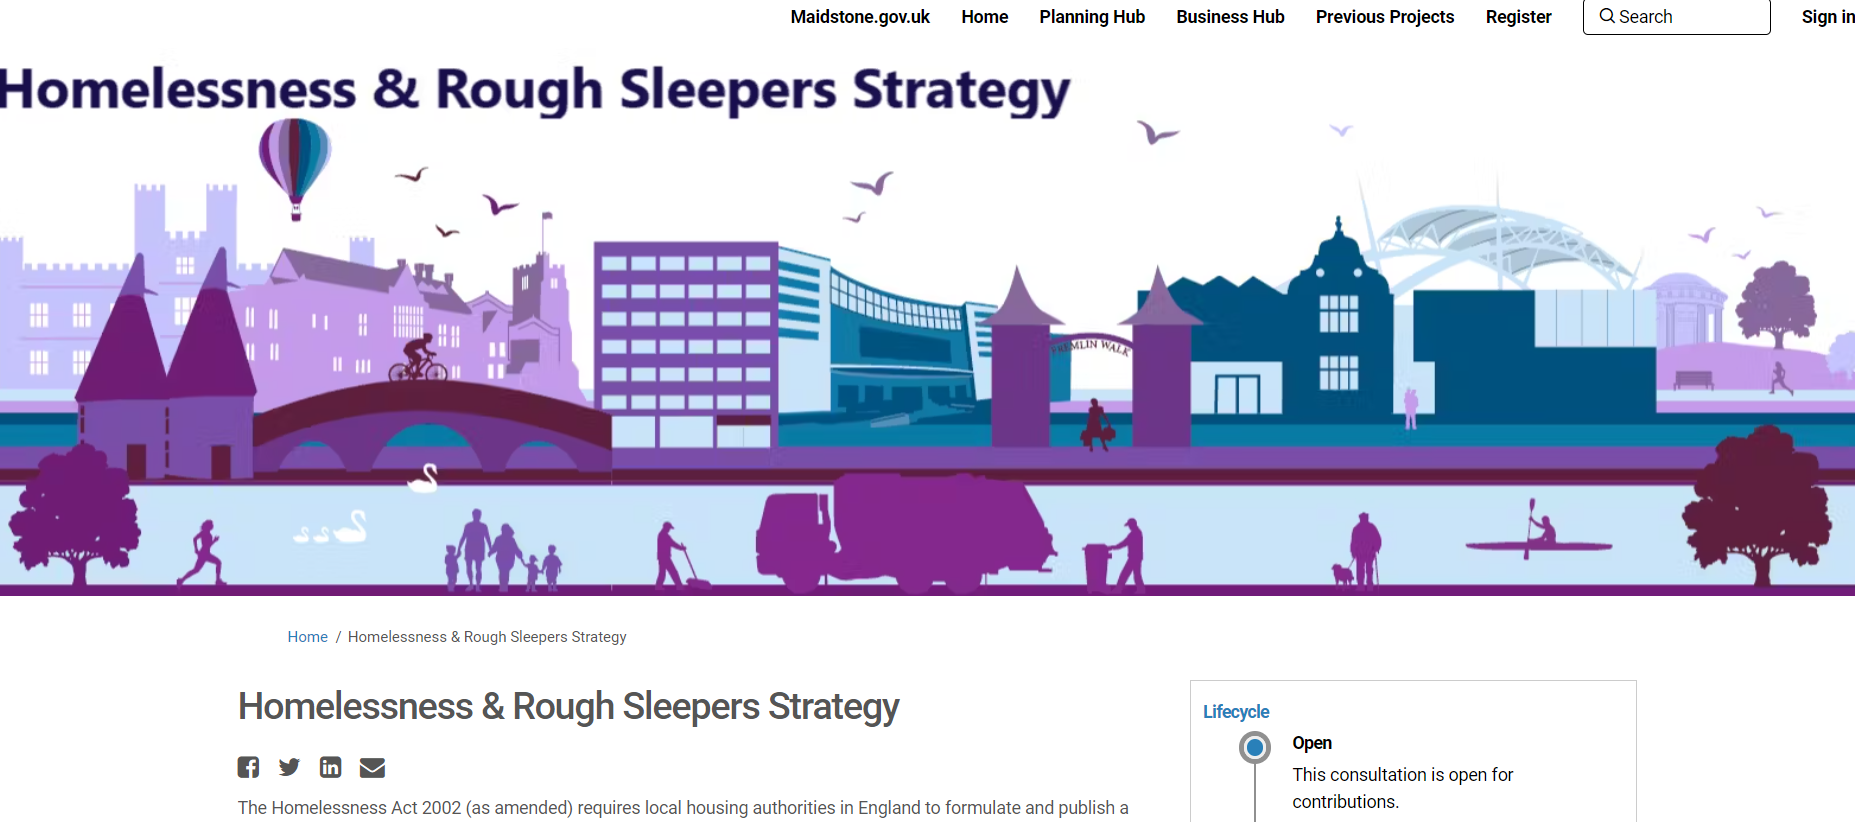 Homelessness and rough sleepers survey  